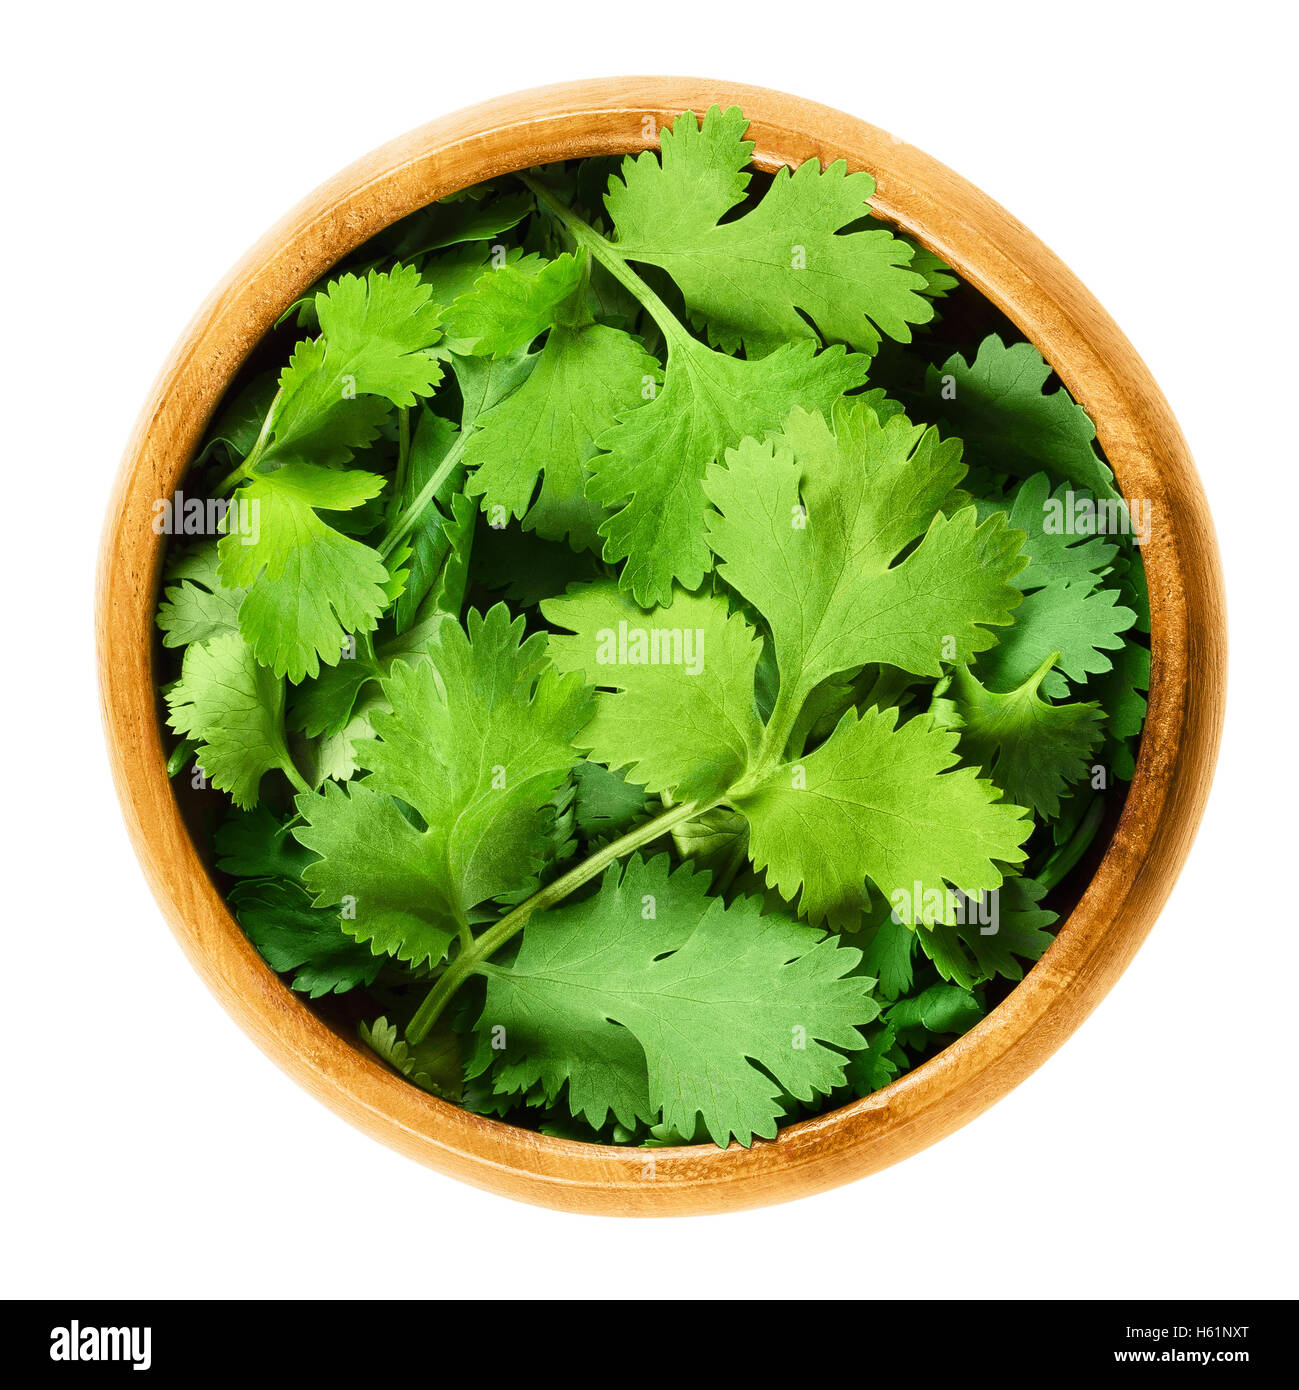 Fresh coriander leaves, also known as cilantro, Chinese parsley and dhania, in a wooden bowl on white background. Stock Photo